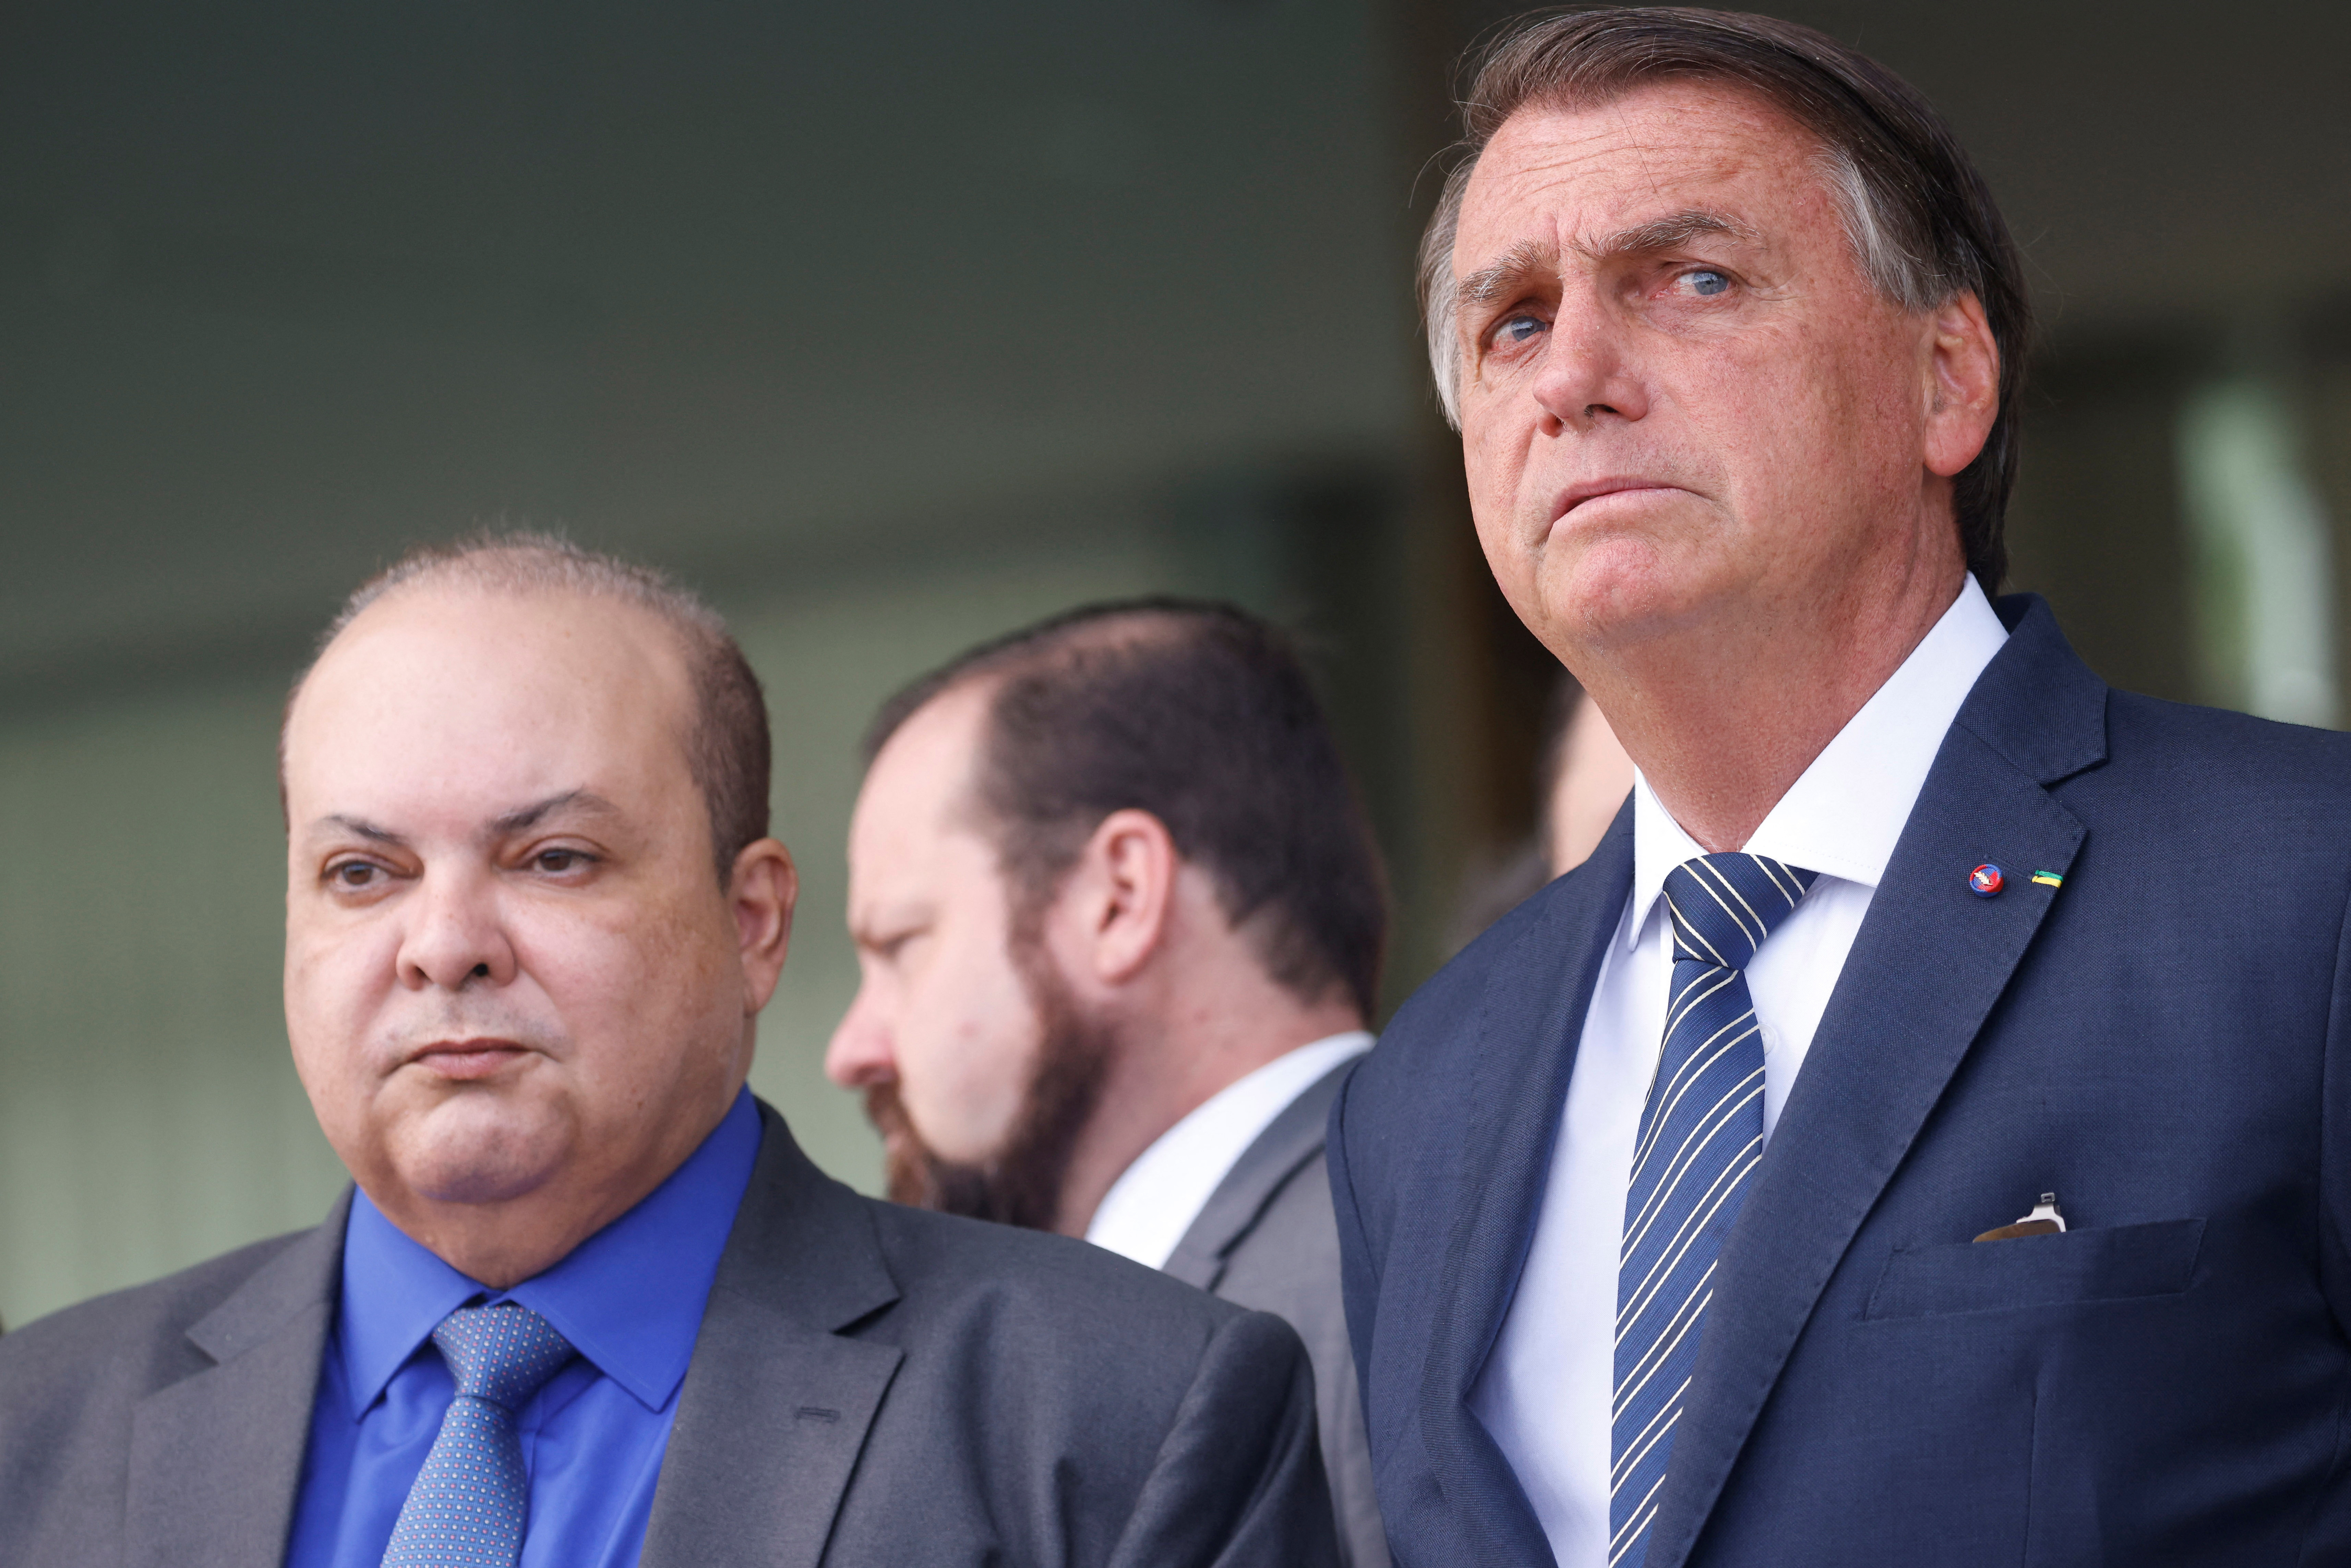 Brasilia Governor Ibaneis Rocha and Brazil's president and re-election candidate Jair Bolsonaro attend a news conference at the Alvorada Palace in Brasilia, Brazil, October 5, 2022. REUTERS/Adriano Machado